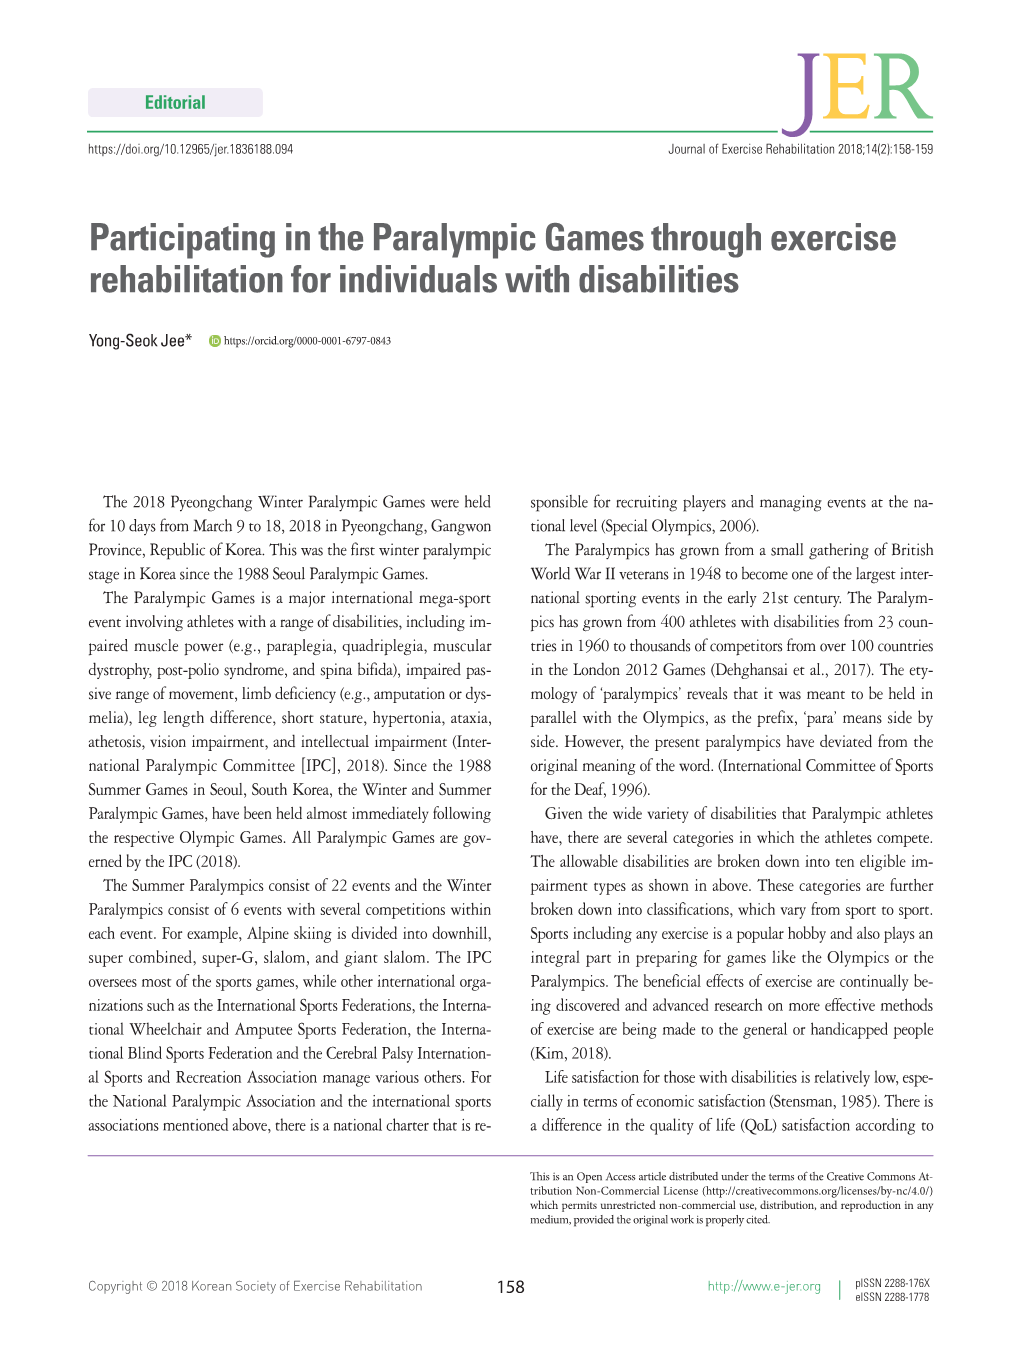 Participating in the Paralympic Games Through Exercise Rehabilitation for Individuals with Disabilities